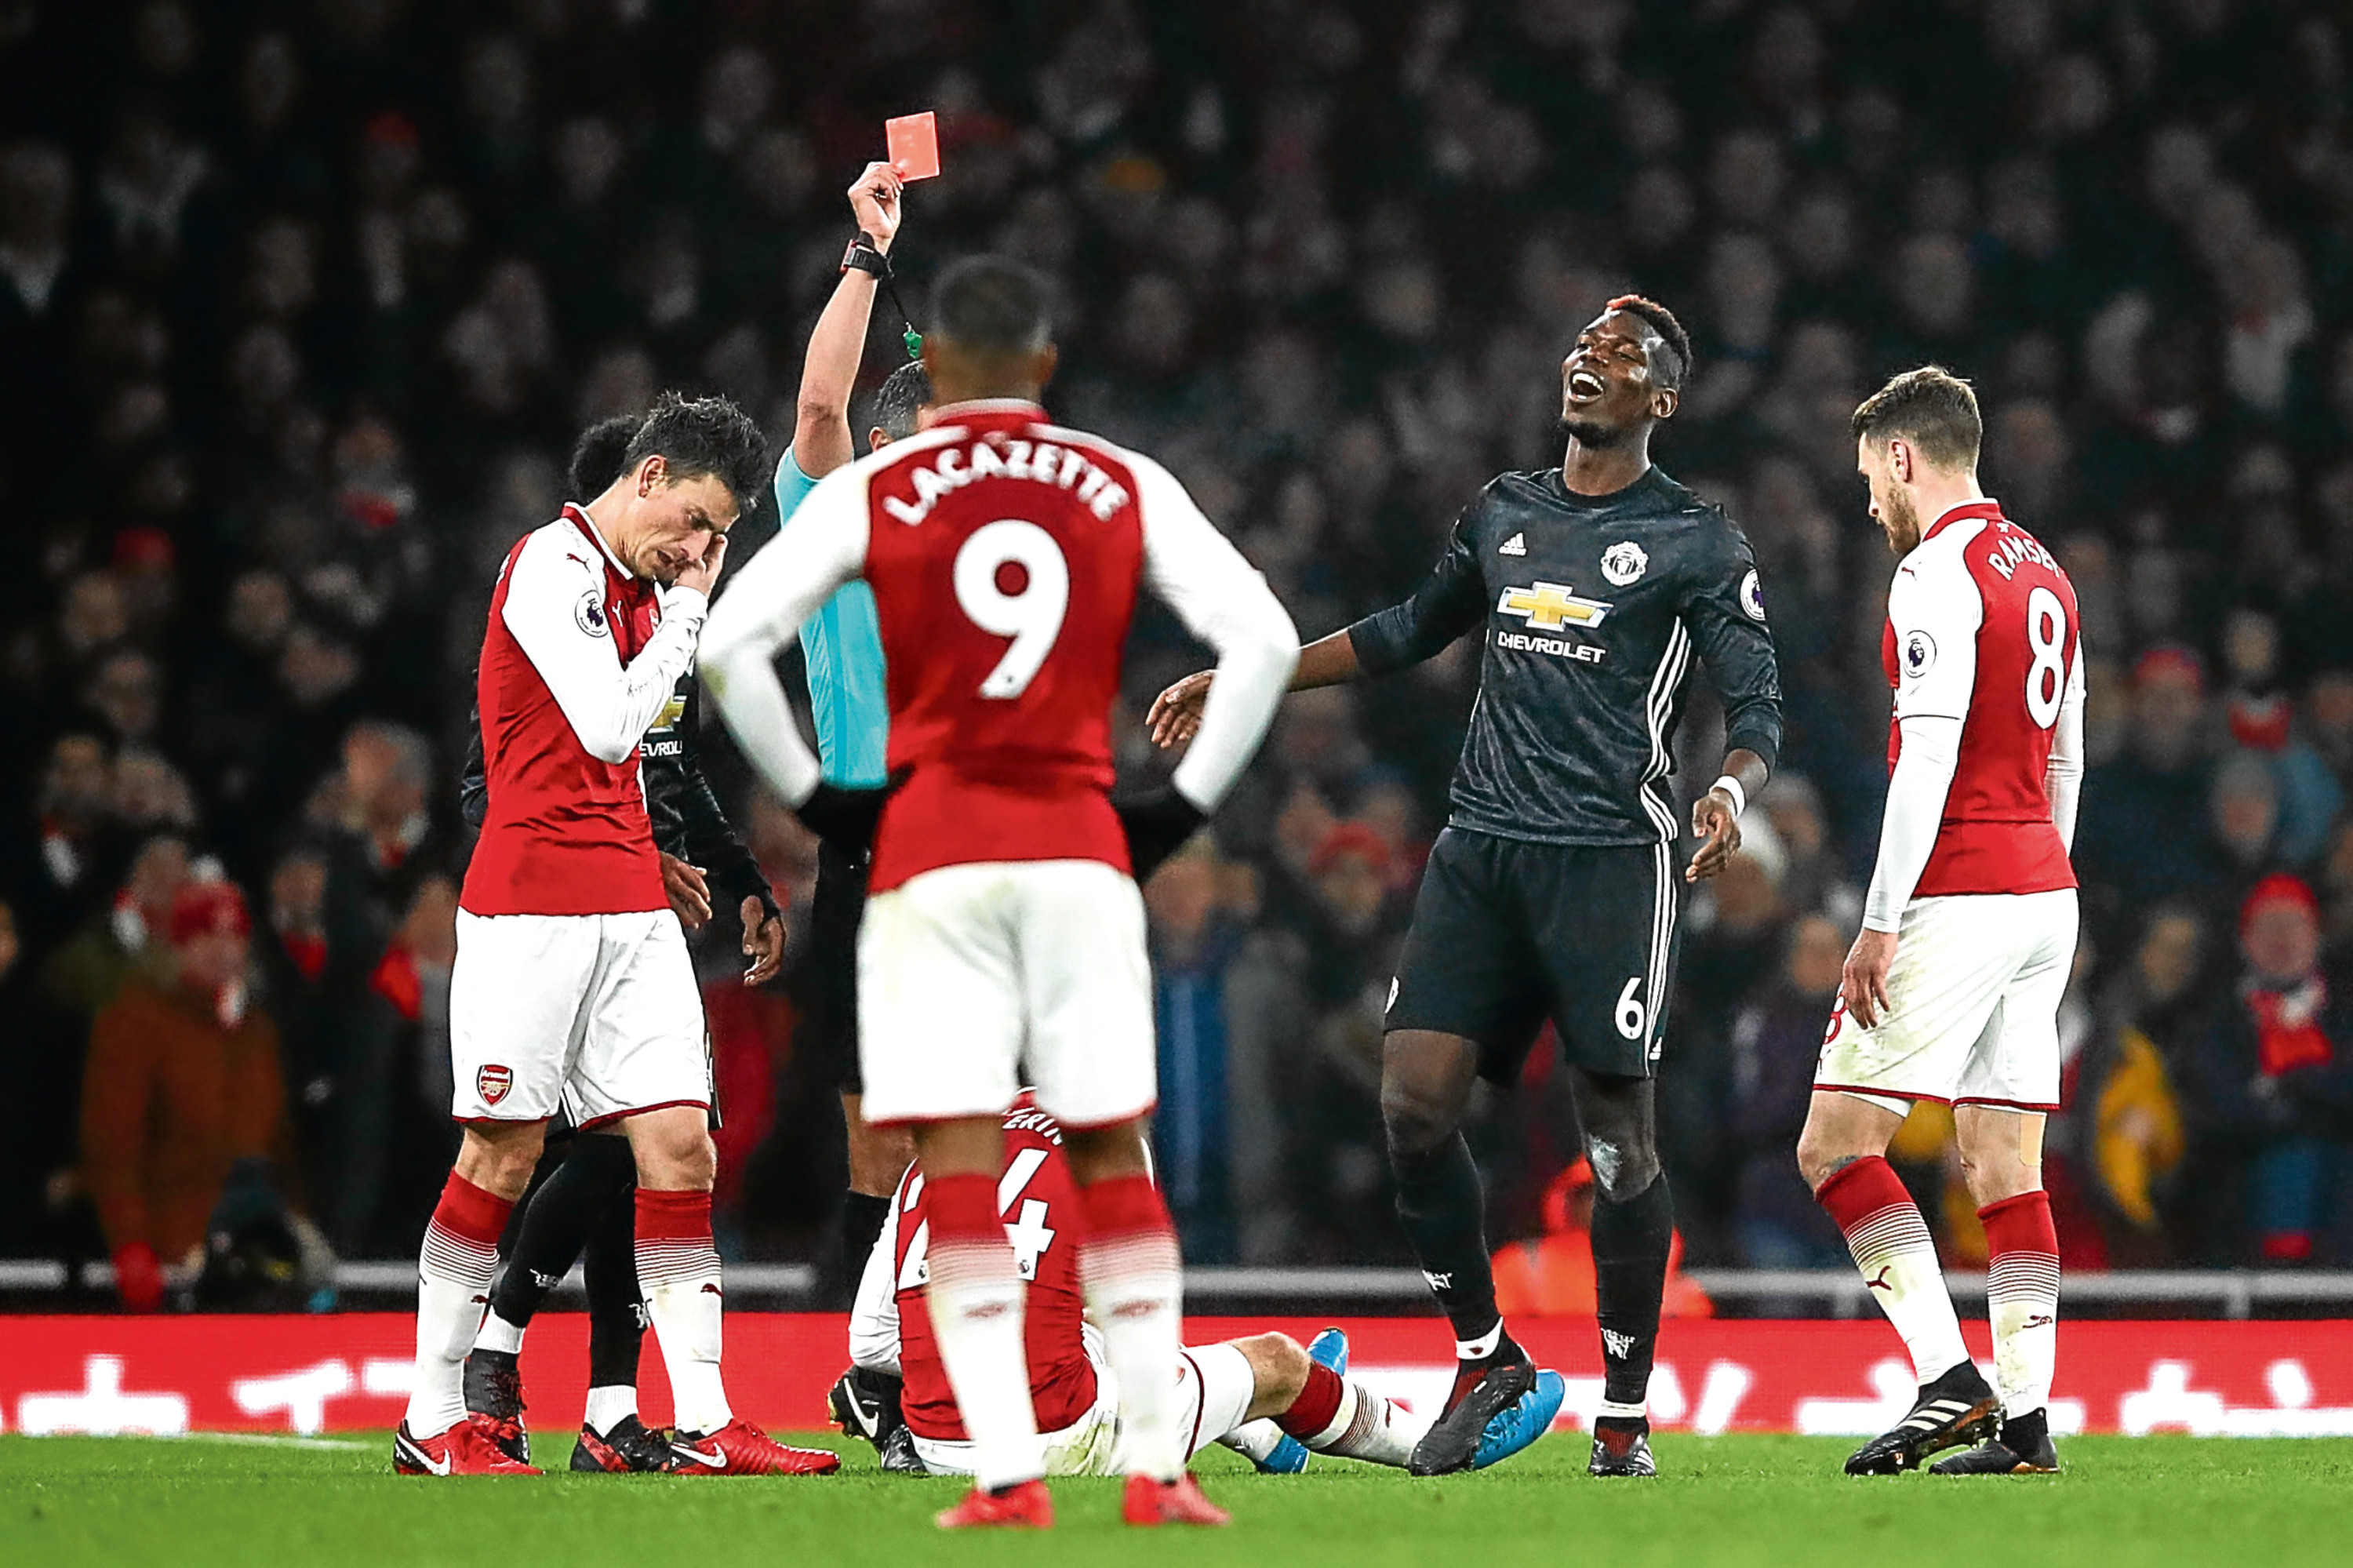 Paul Pogba sees red against Arsenal (Julian Finney / Getty Images)